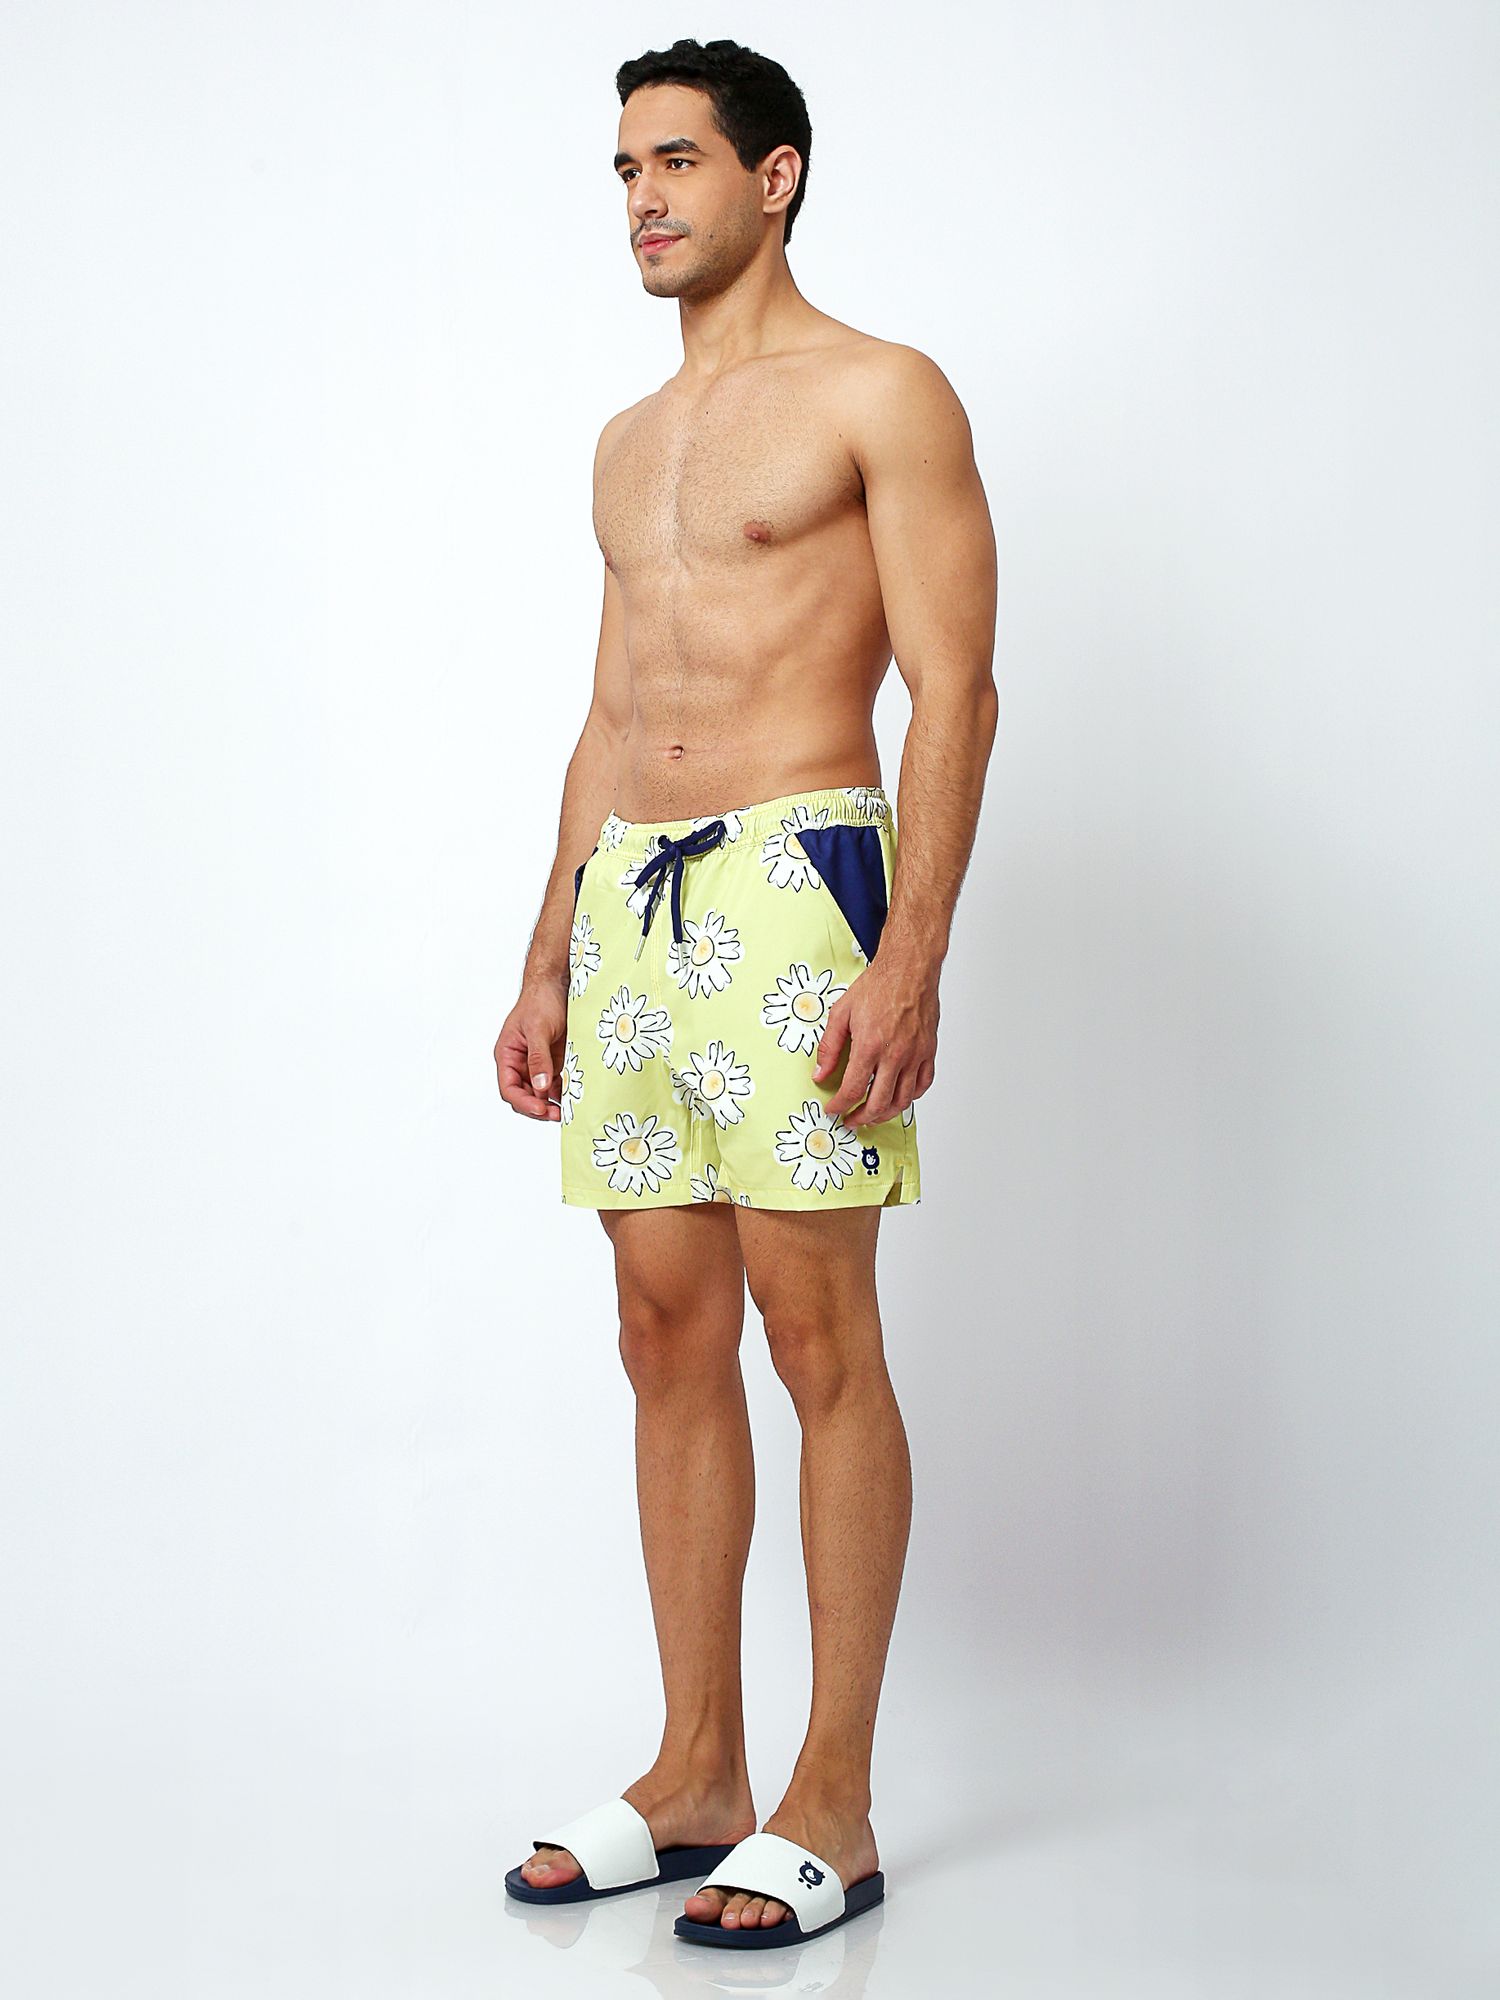 Buy Randy Cow Daisy Print Swim Shorts with Waterproof Pocket, Yellow Online at johnlewis.com